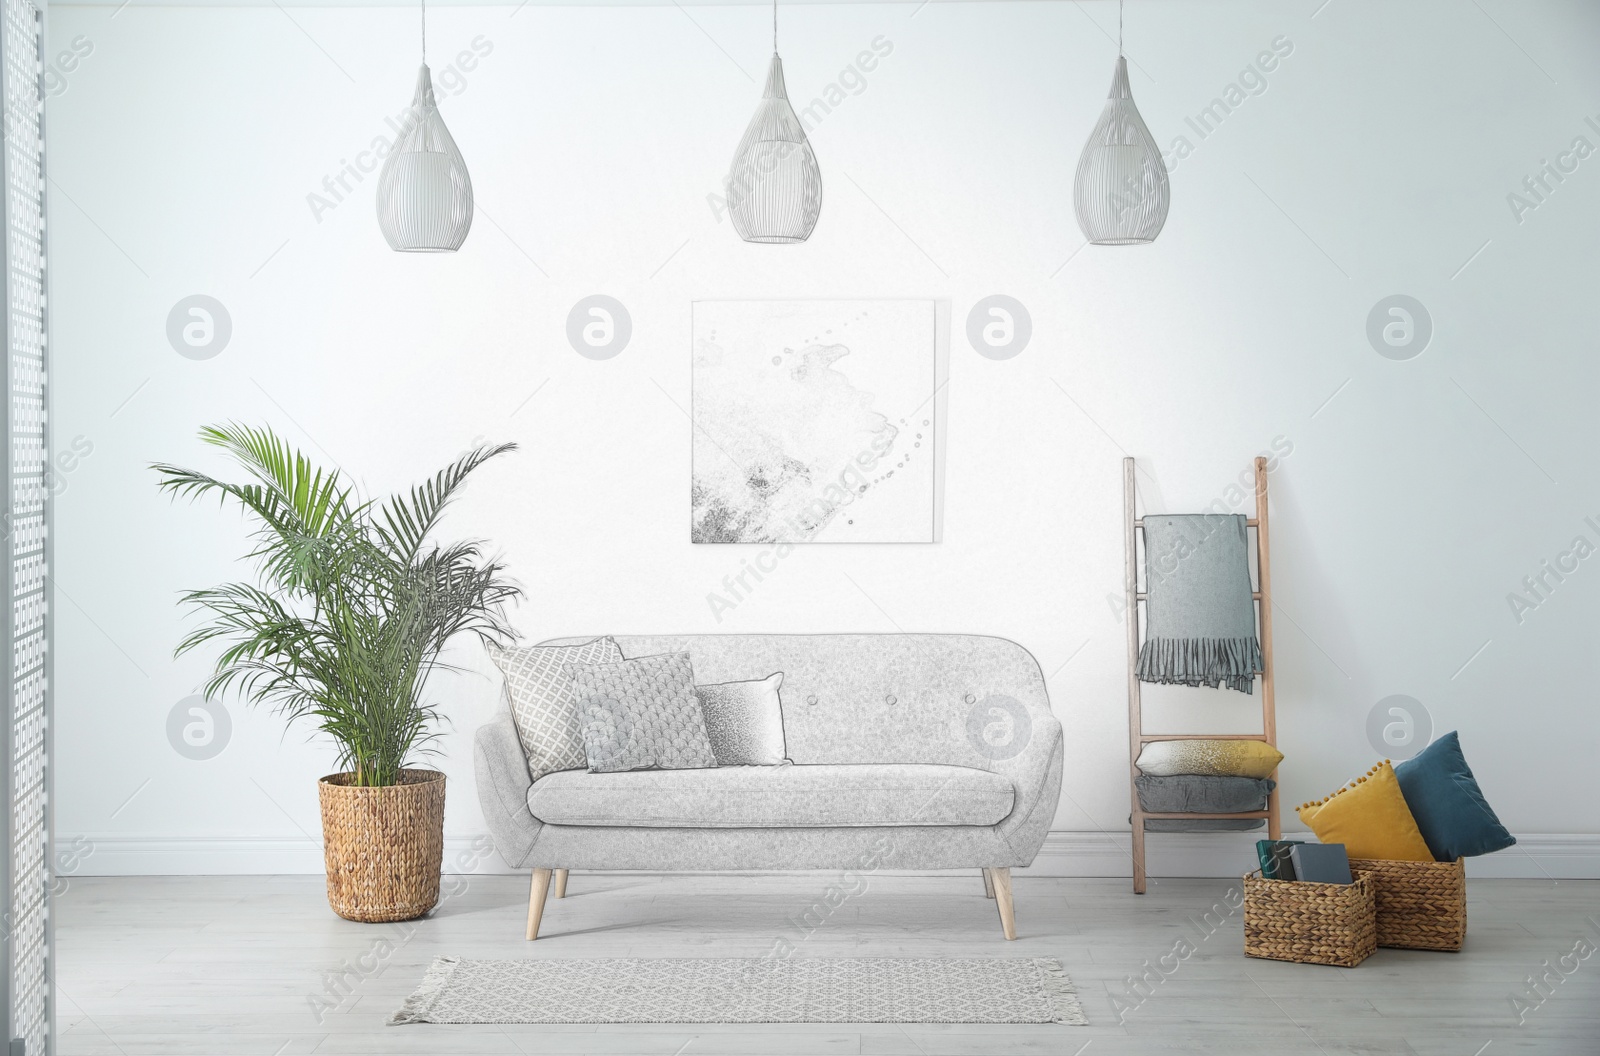 Image of Different soft pillows on sofa in living room. Illustrated interior design